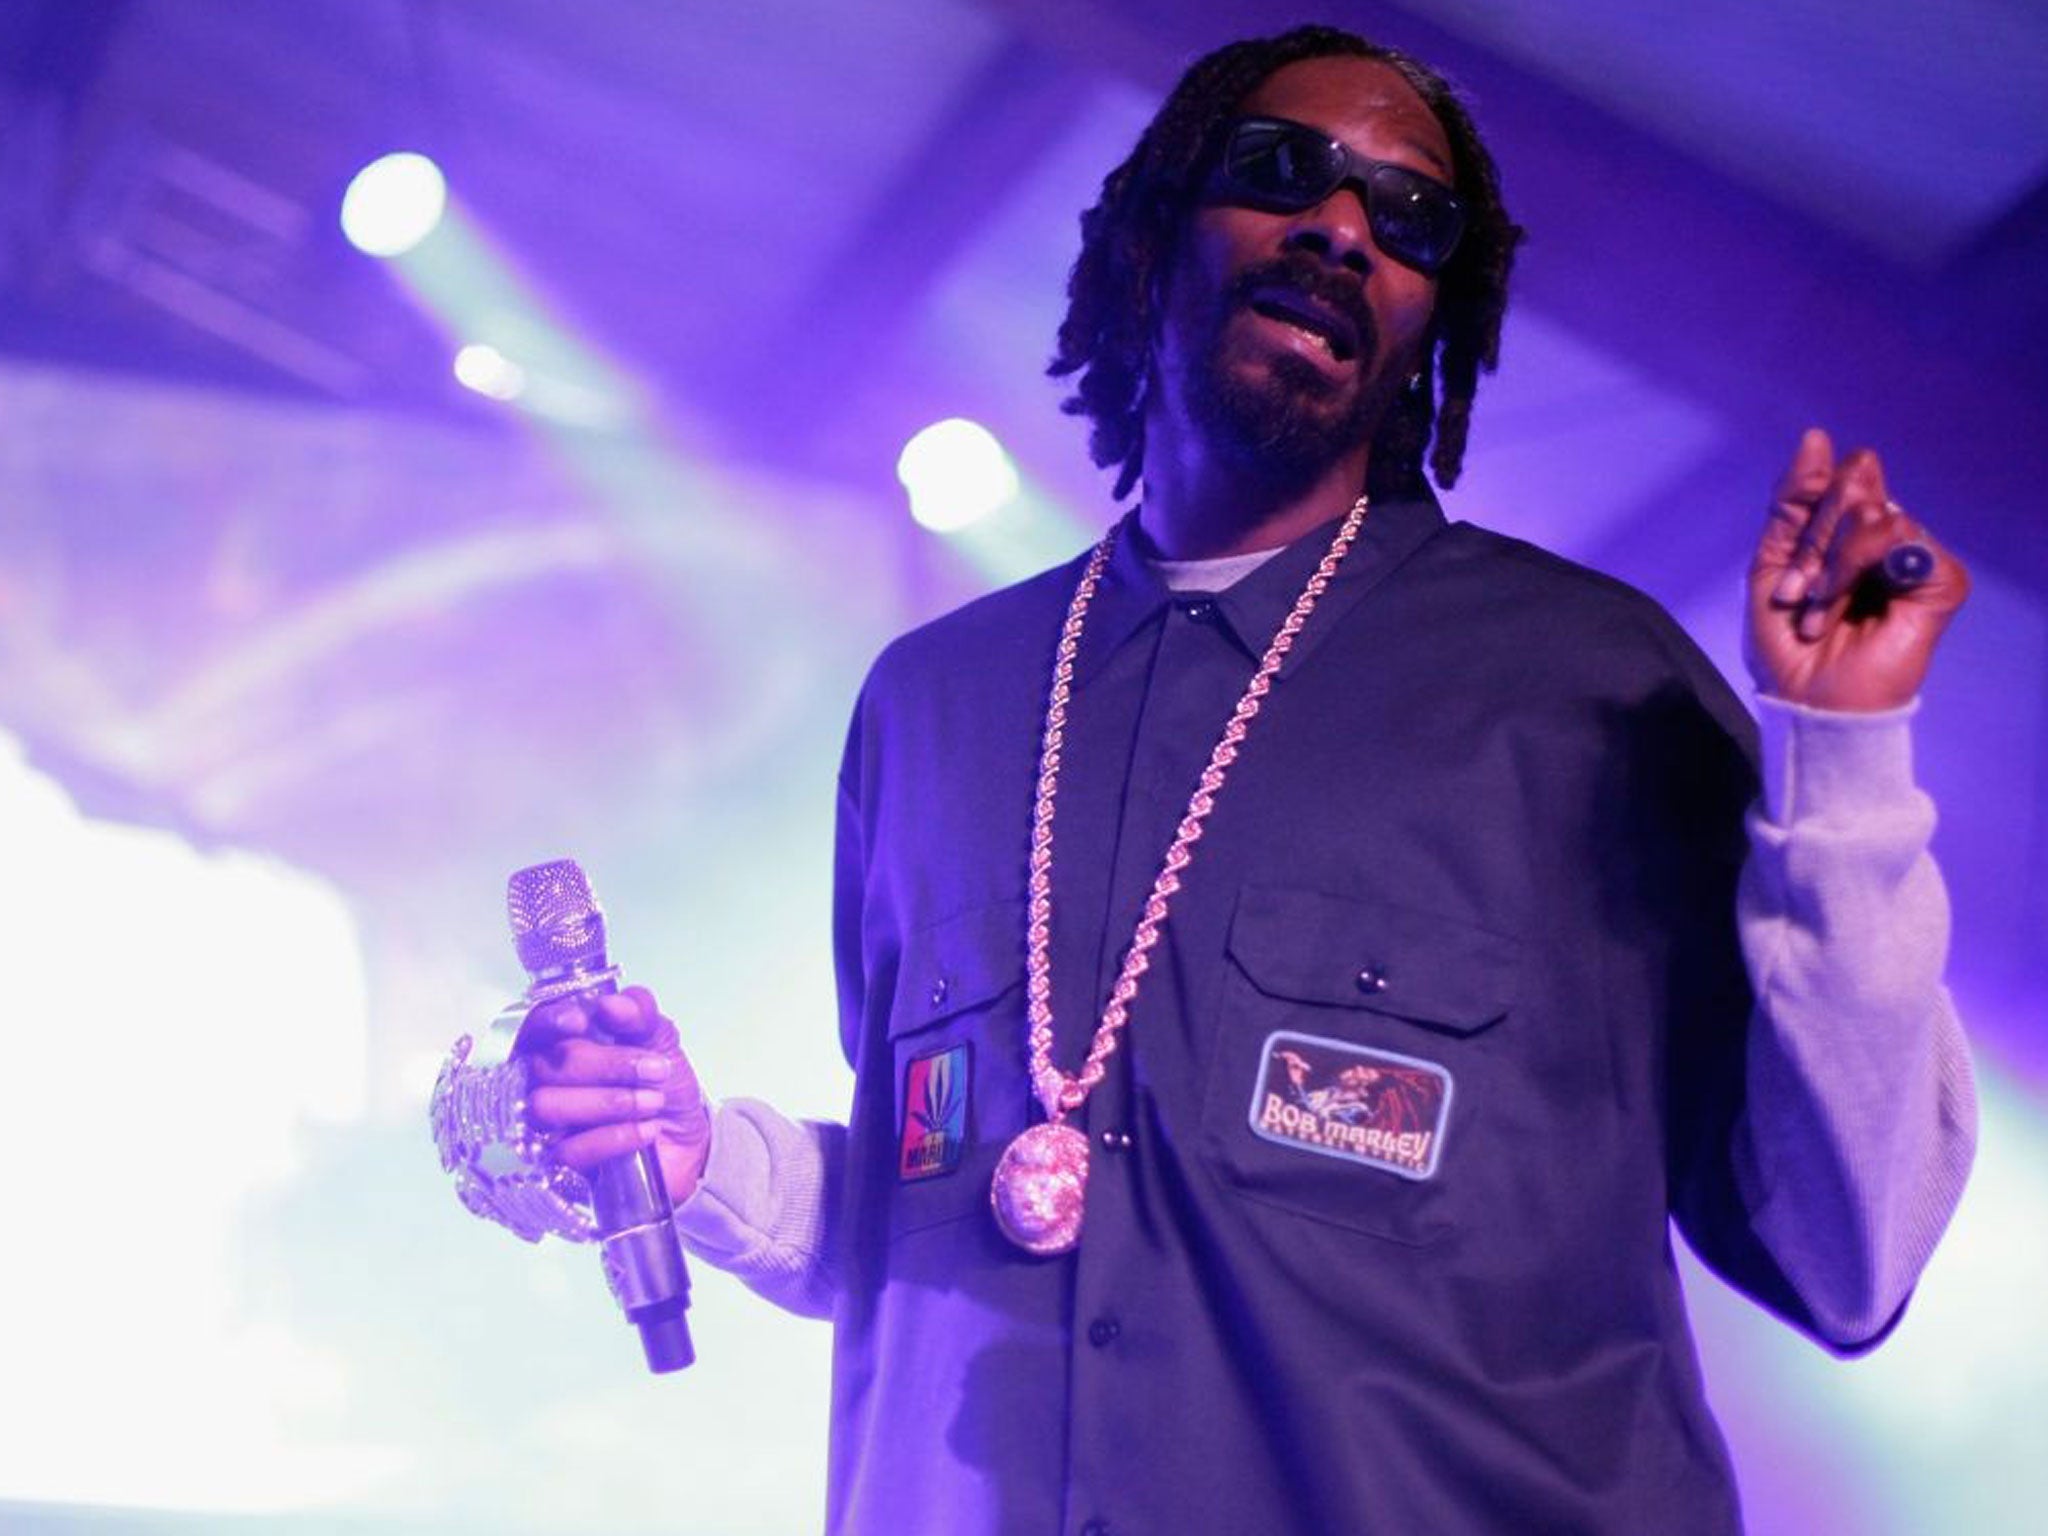 Snoop Dogg performs at this year's SXSW Festival